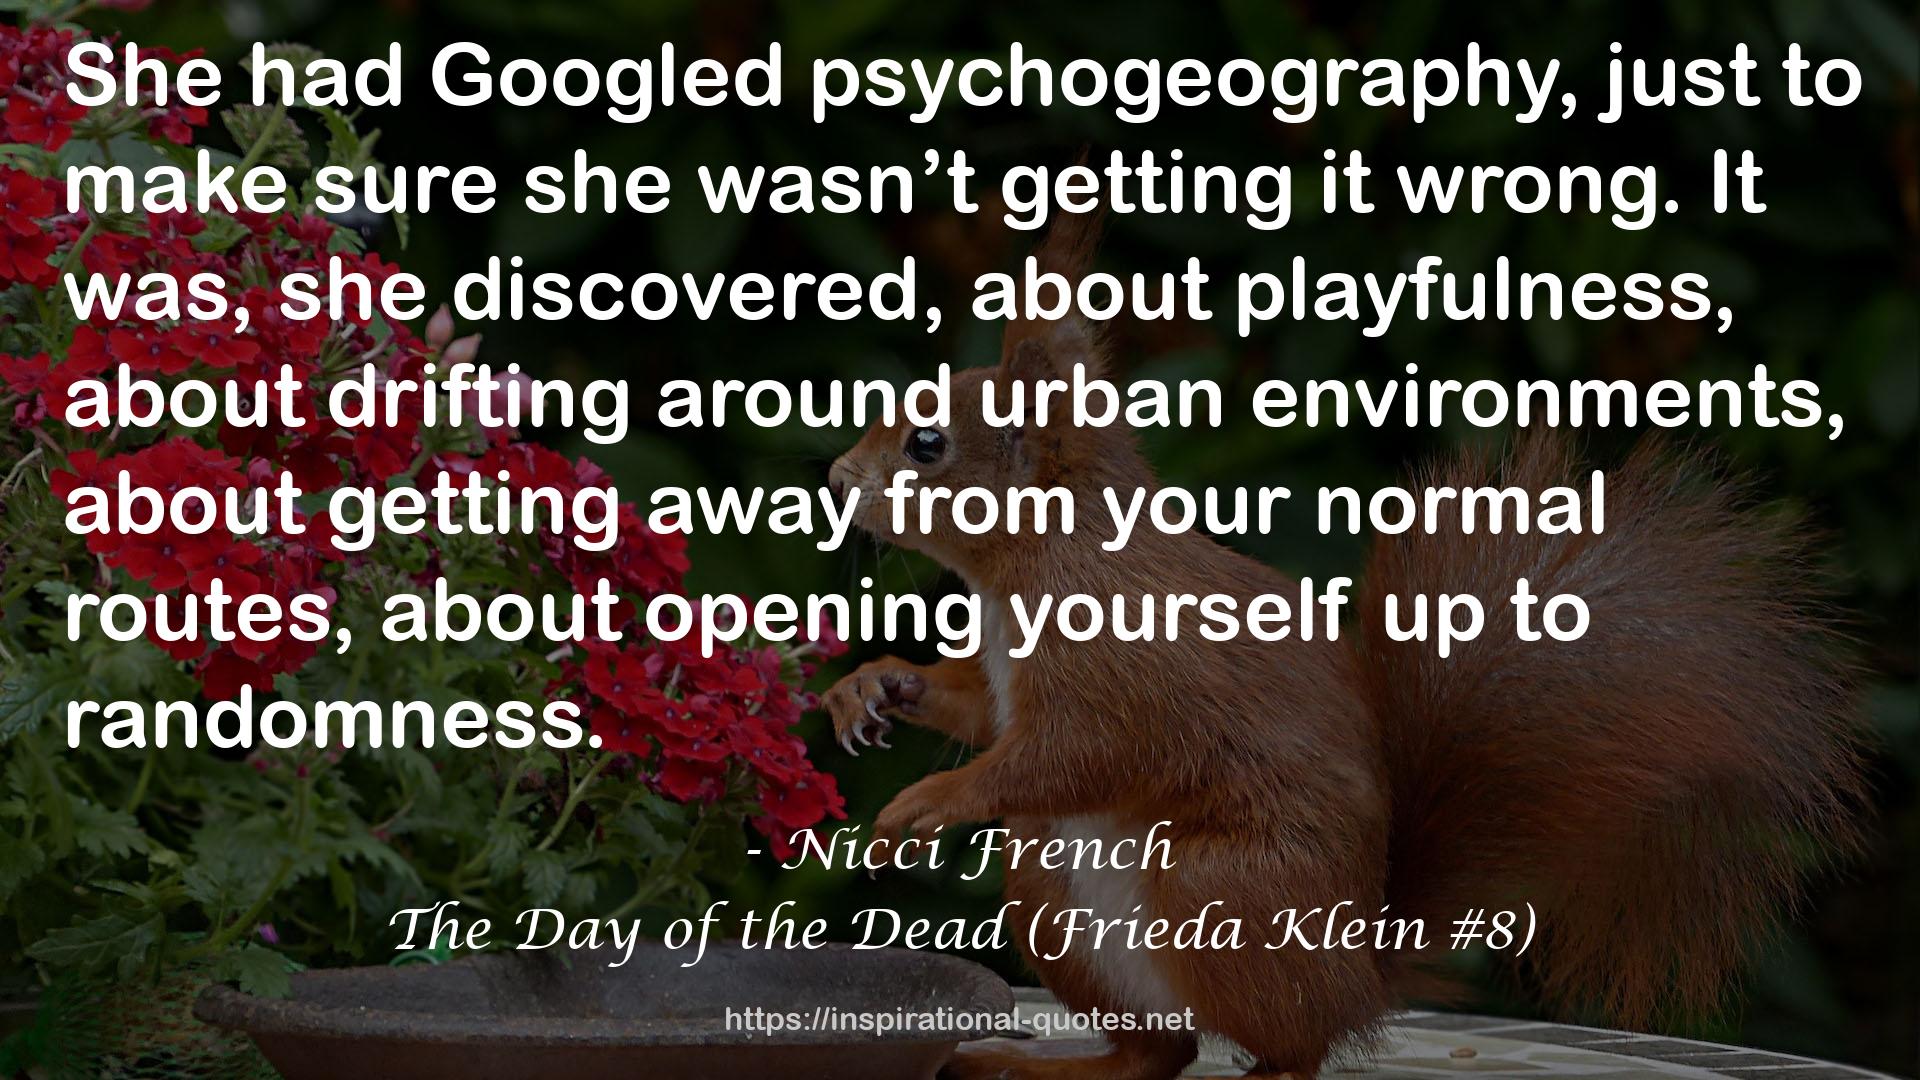 The Day of the Dead (Frieda Klein #8) QUOTES